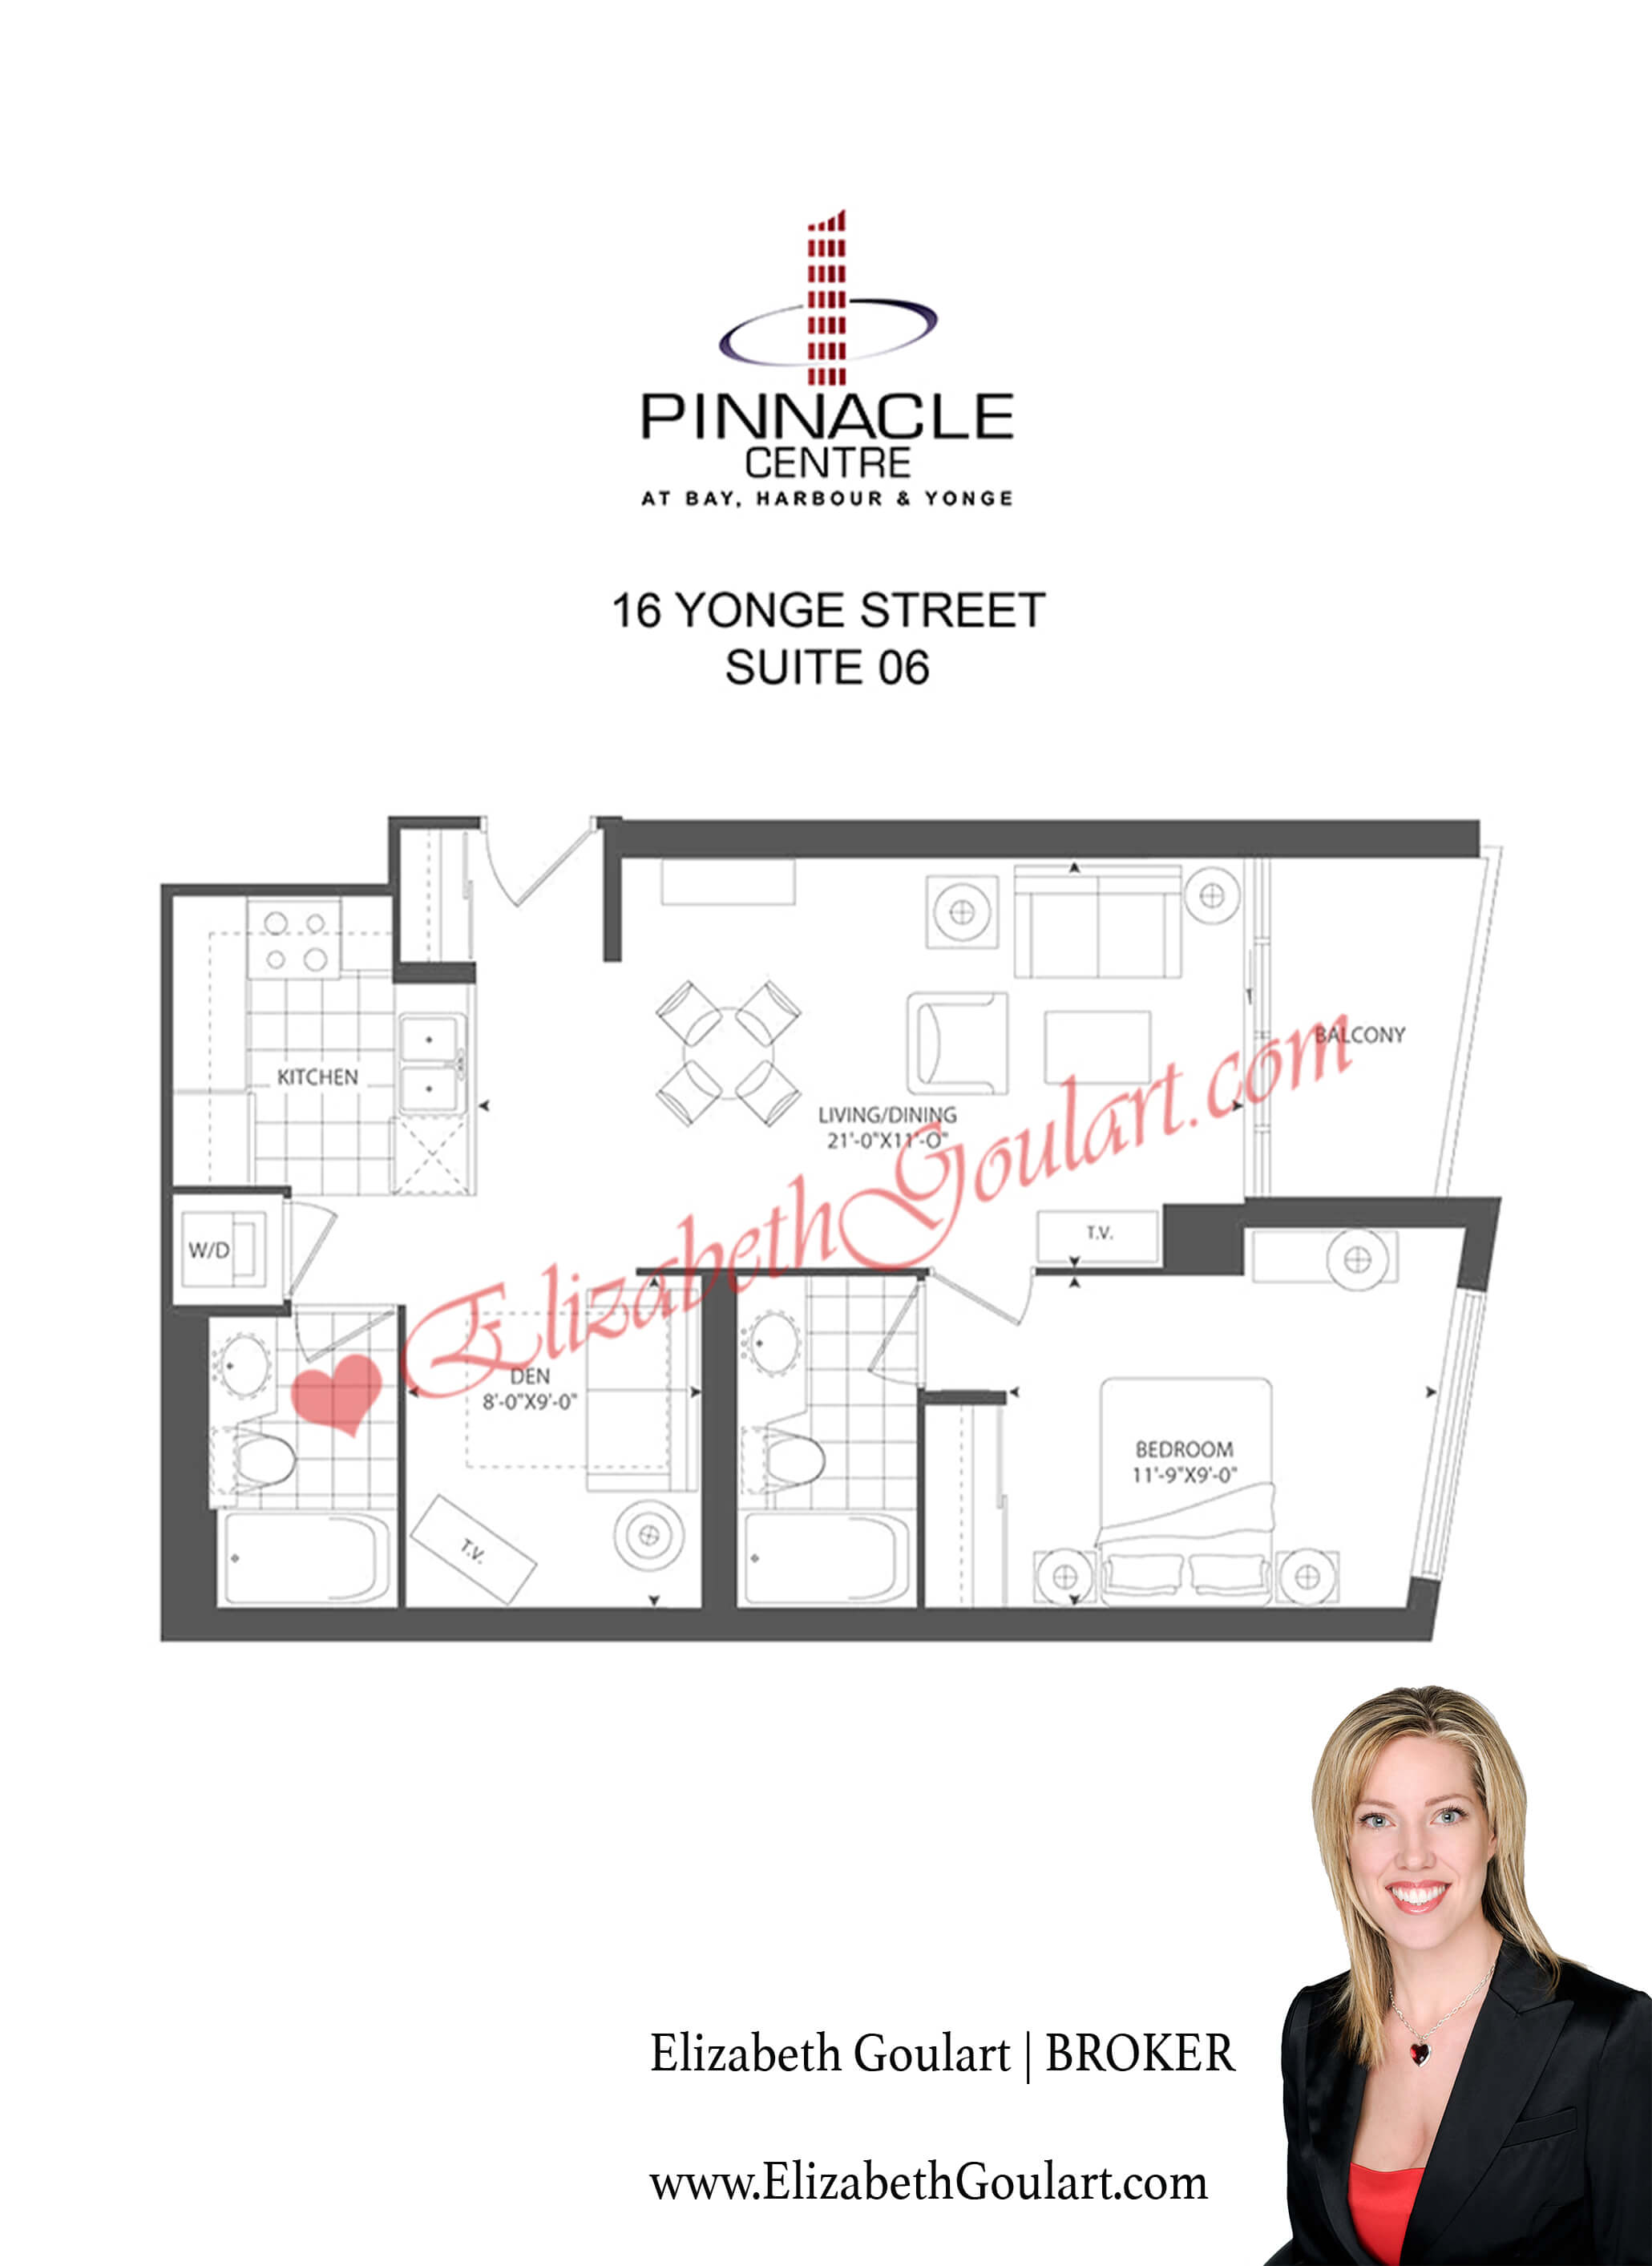 16 Yonge Street Pinnacle Centre Condos For Sale / Rent